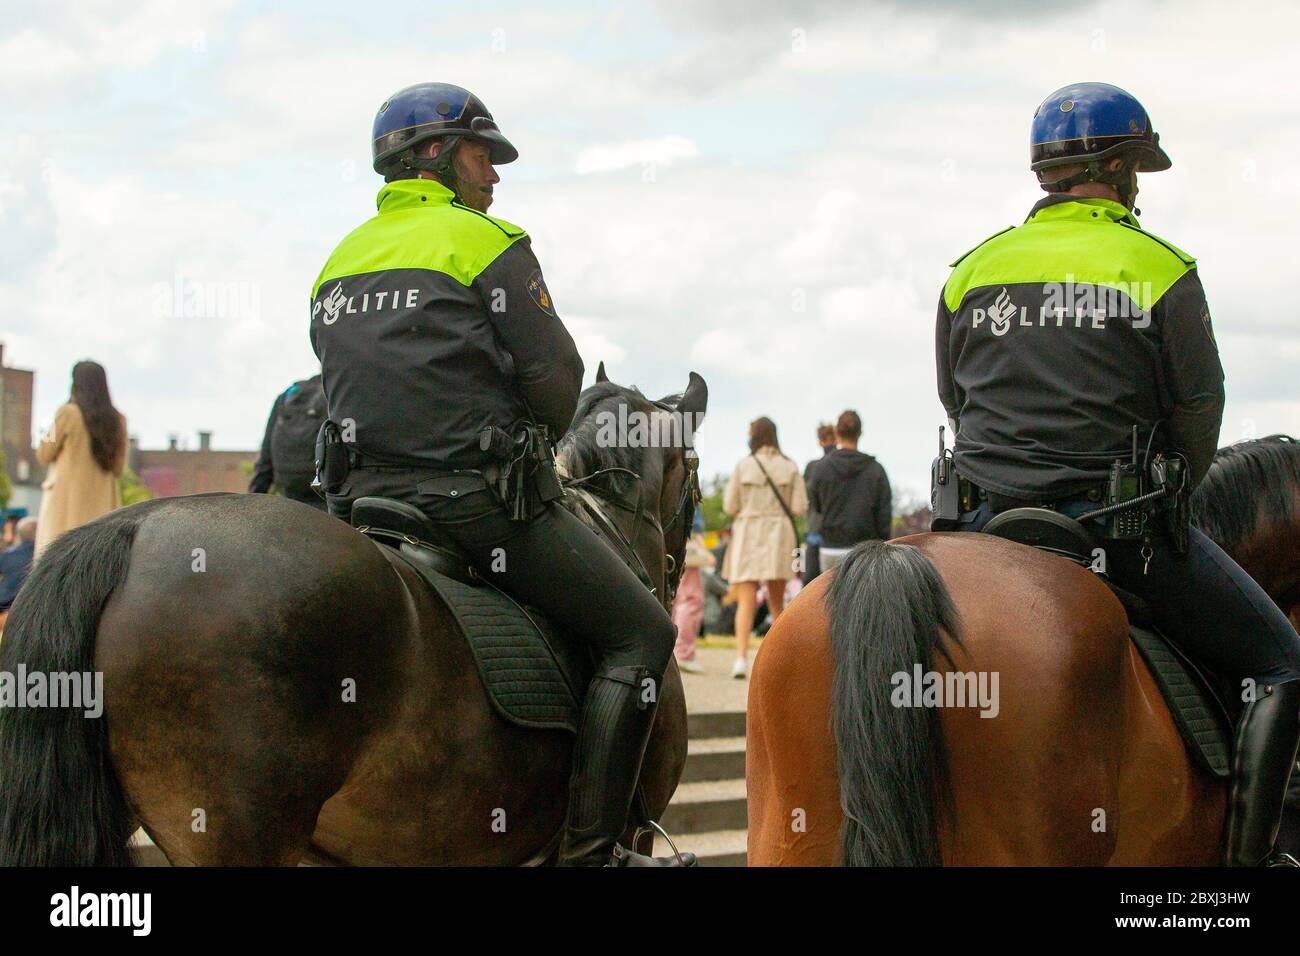 7 june 2020 Maastricht, Netherlands People gathering together for a protest against racism #blm #blacklivesmatters on June 7, 2020 in Maastricht, The Netherlands Stock Photo